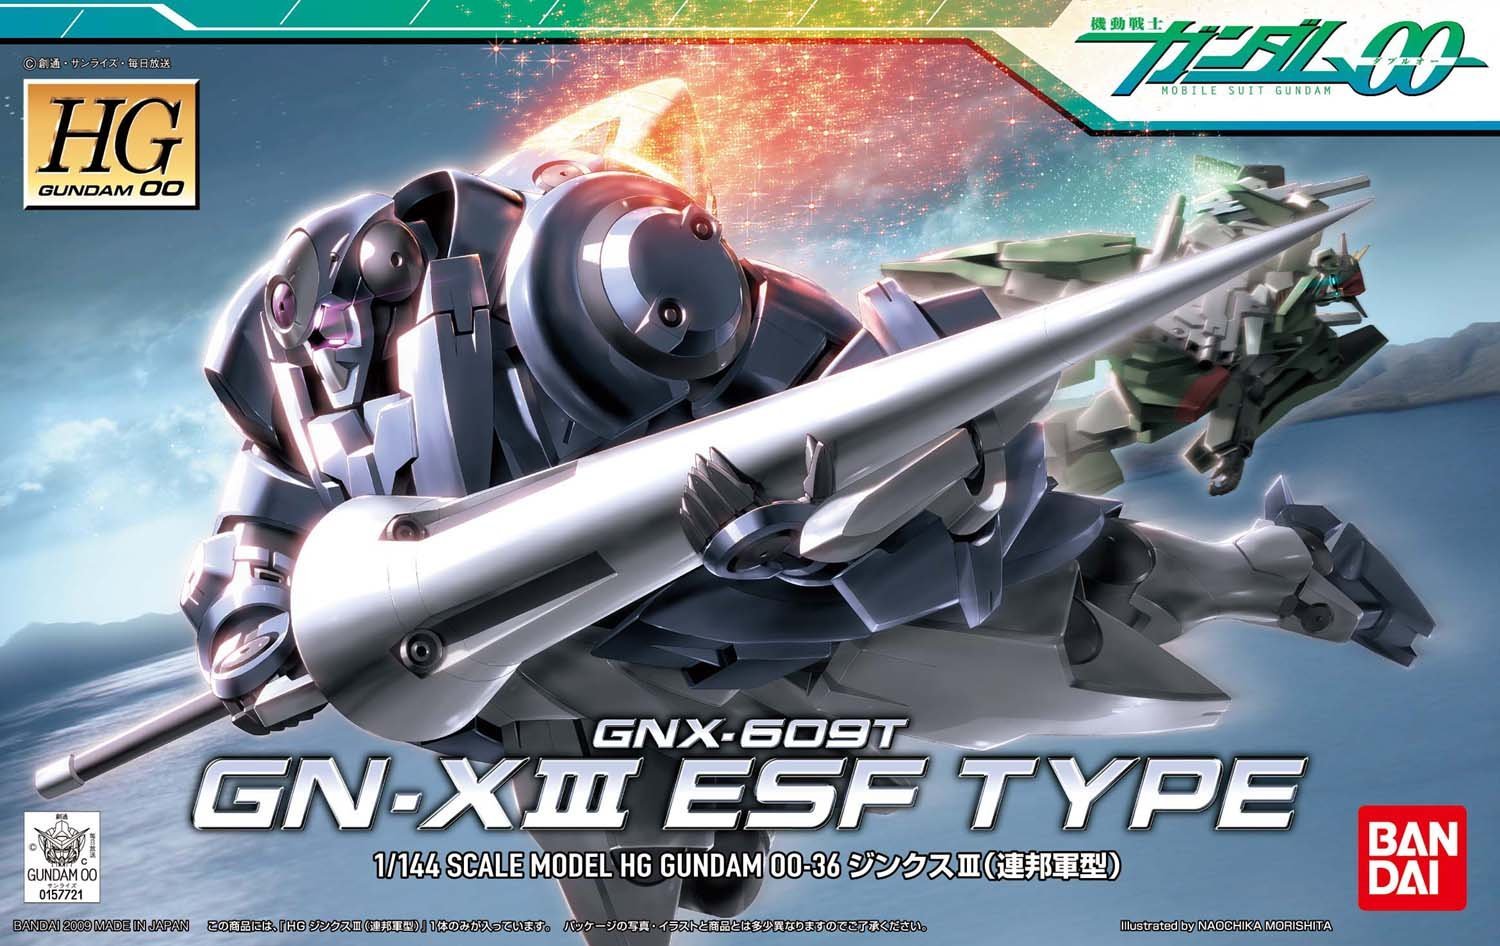 HG GNX-609T GN-X III ESF Type